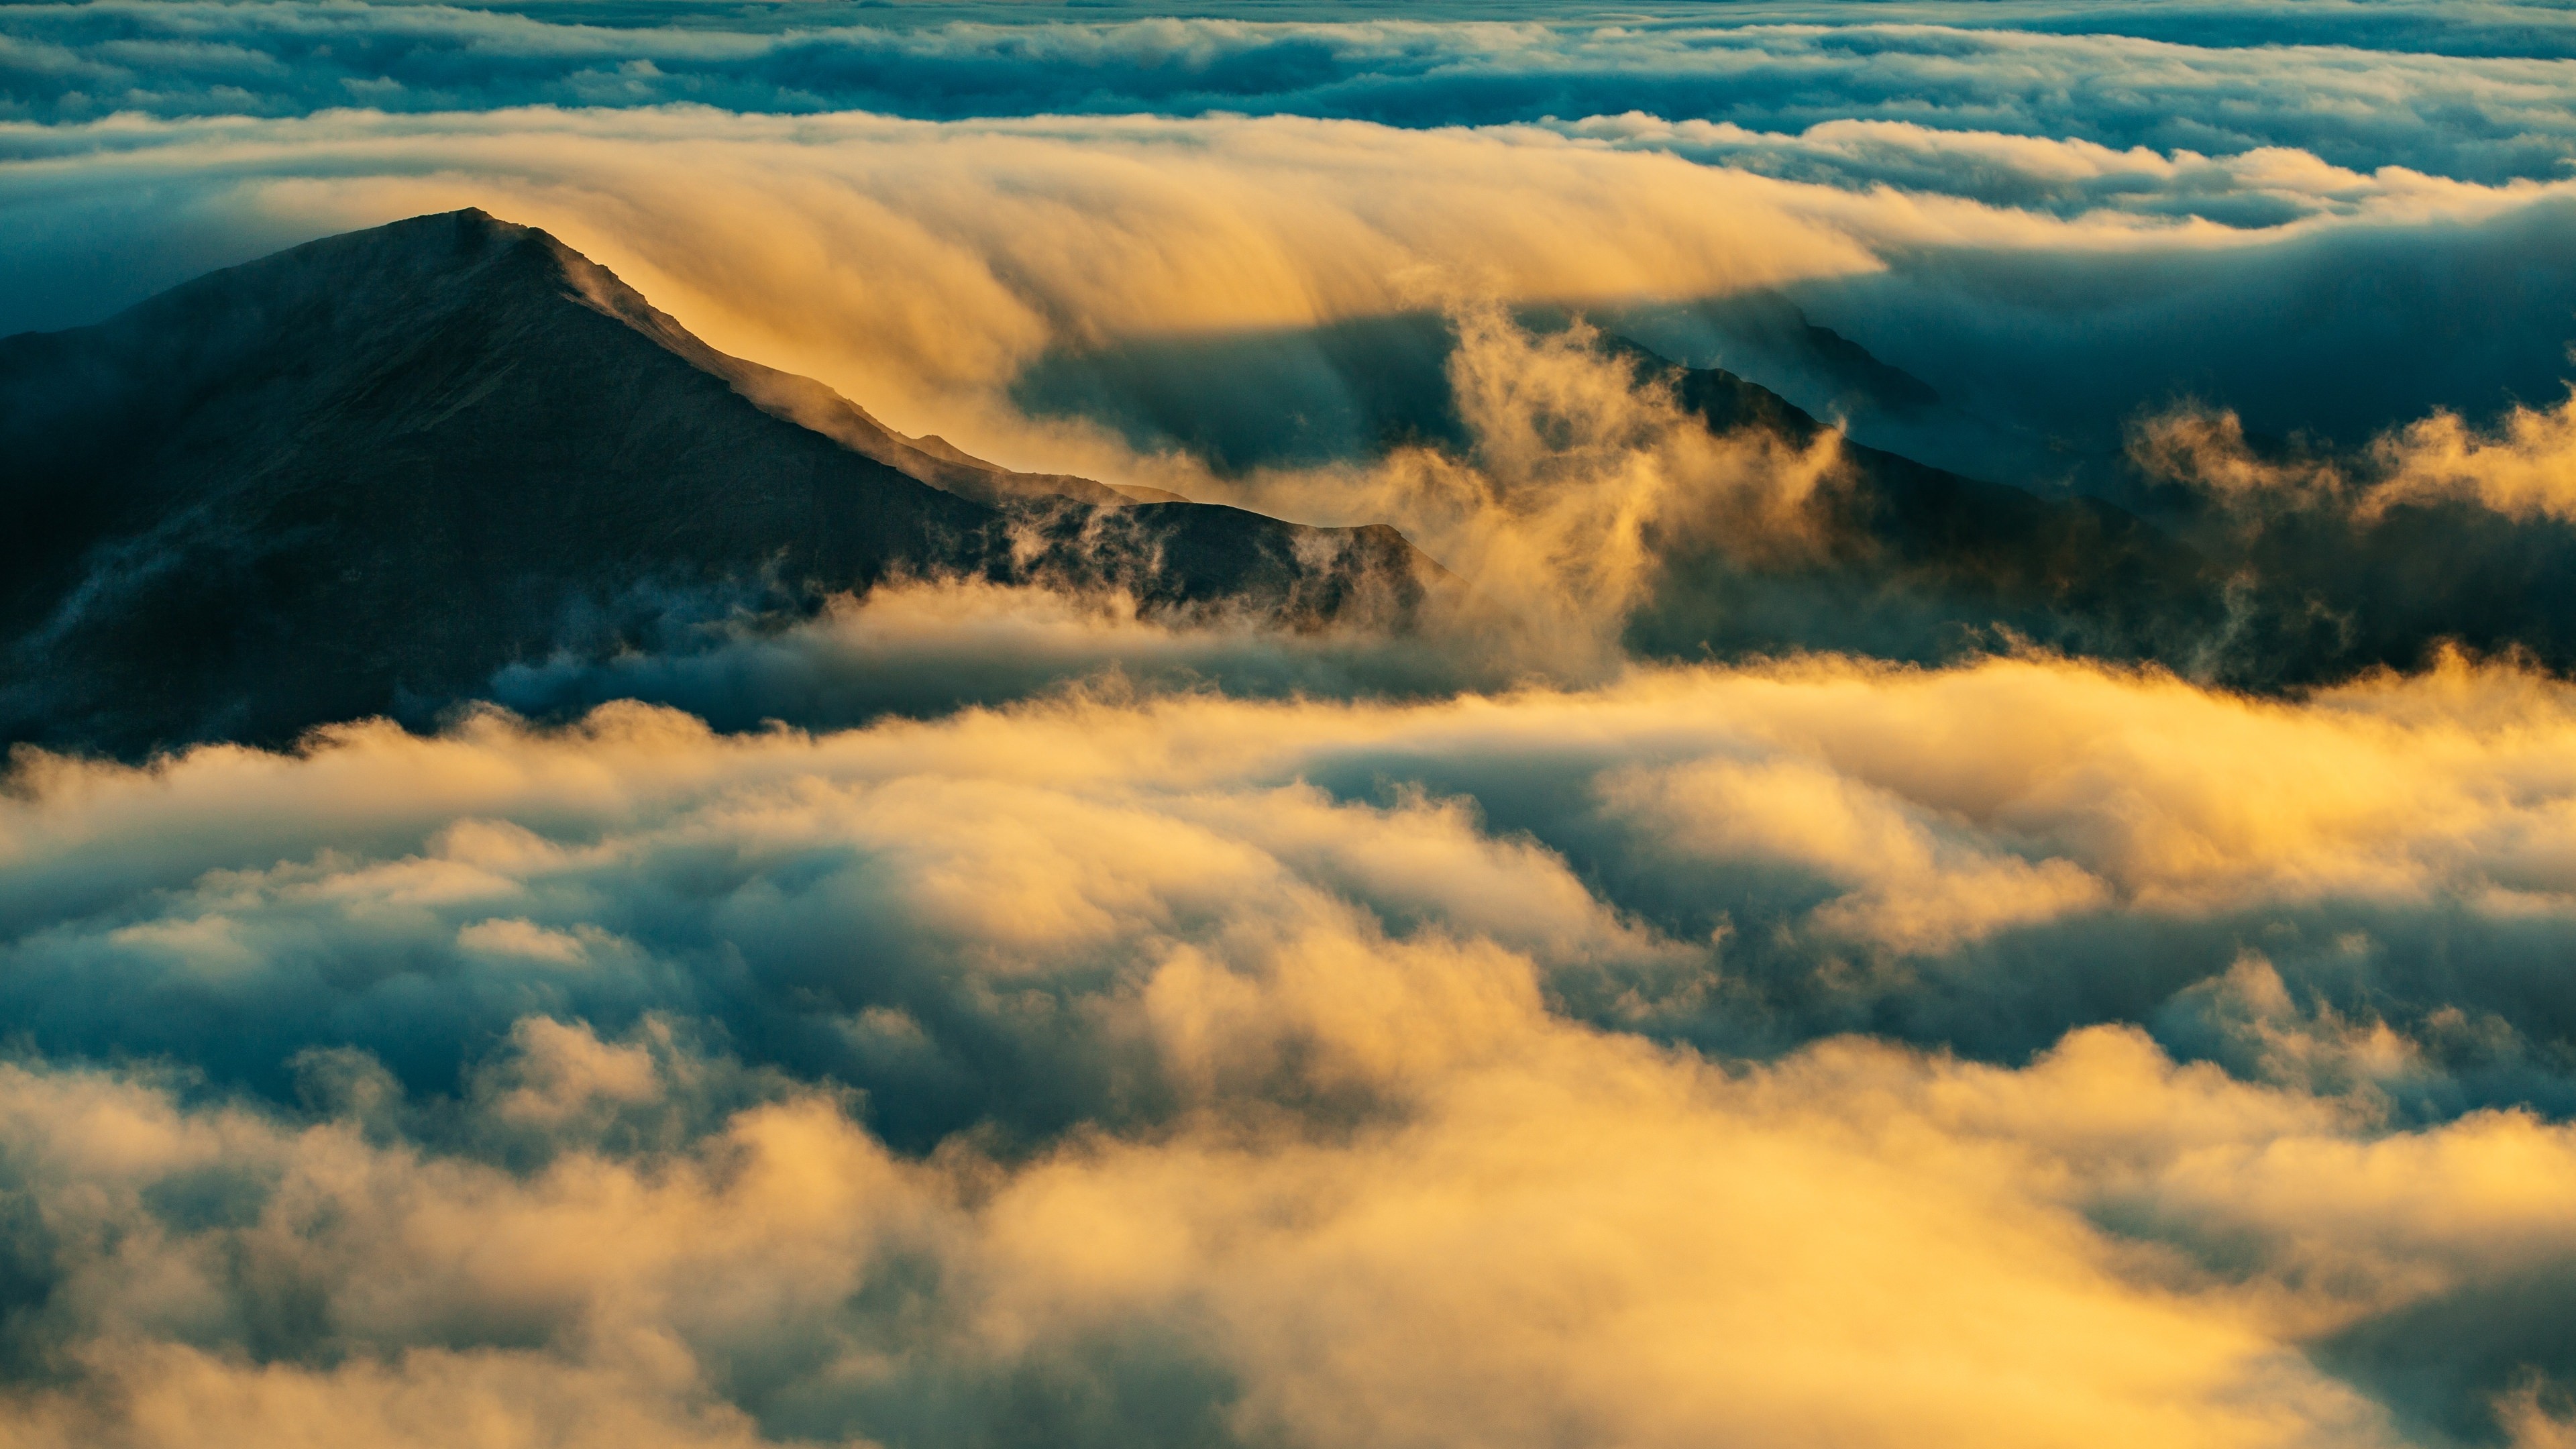 Download 3840x2160 Beyond The Clouds, Mountain, Peak